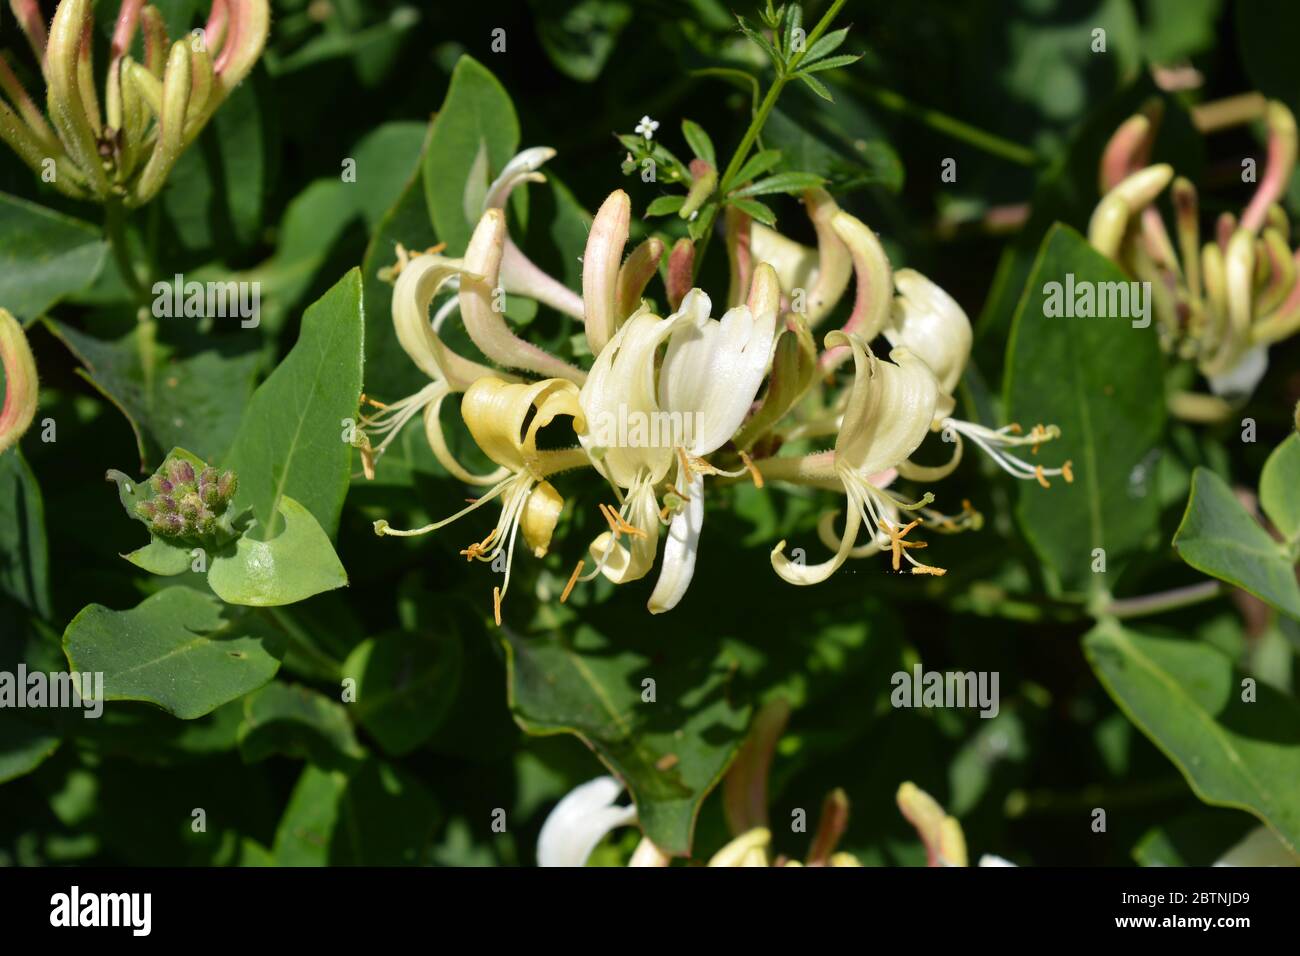 Wild honeysuckle flower, also known as Lonicera periclymenum, close up Stock Photo